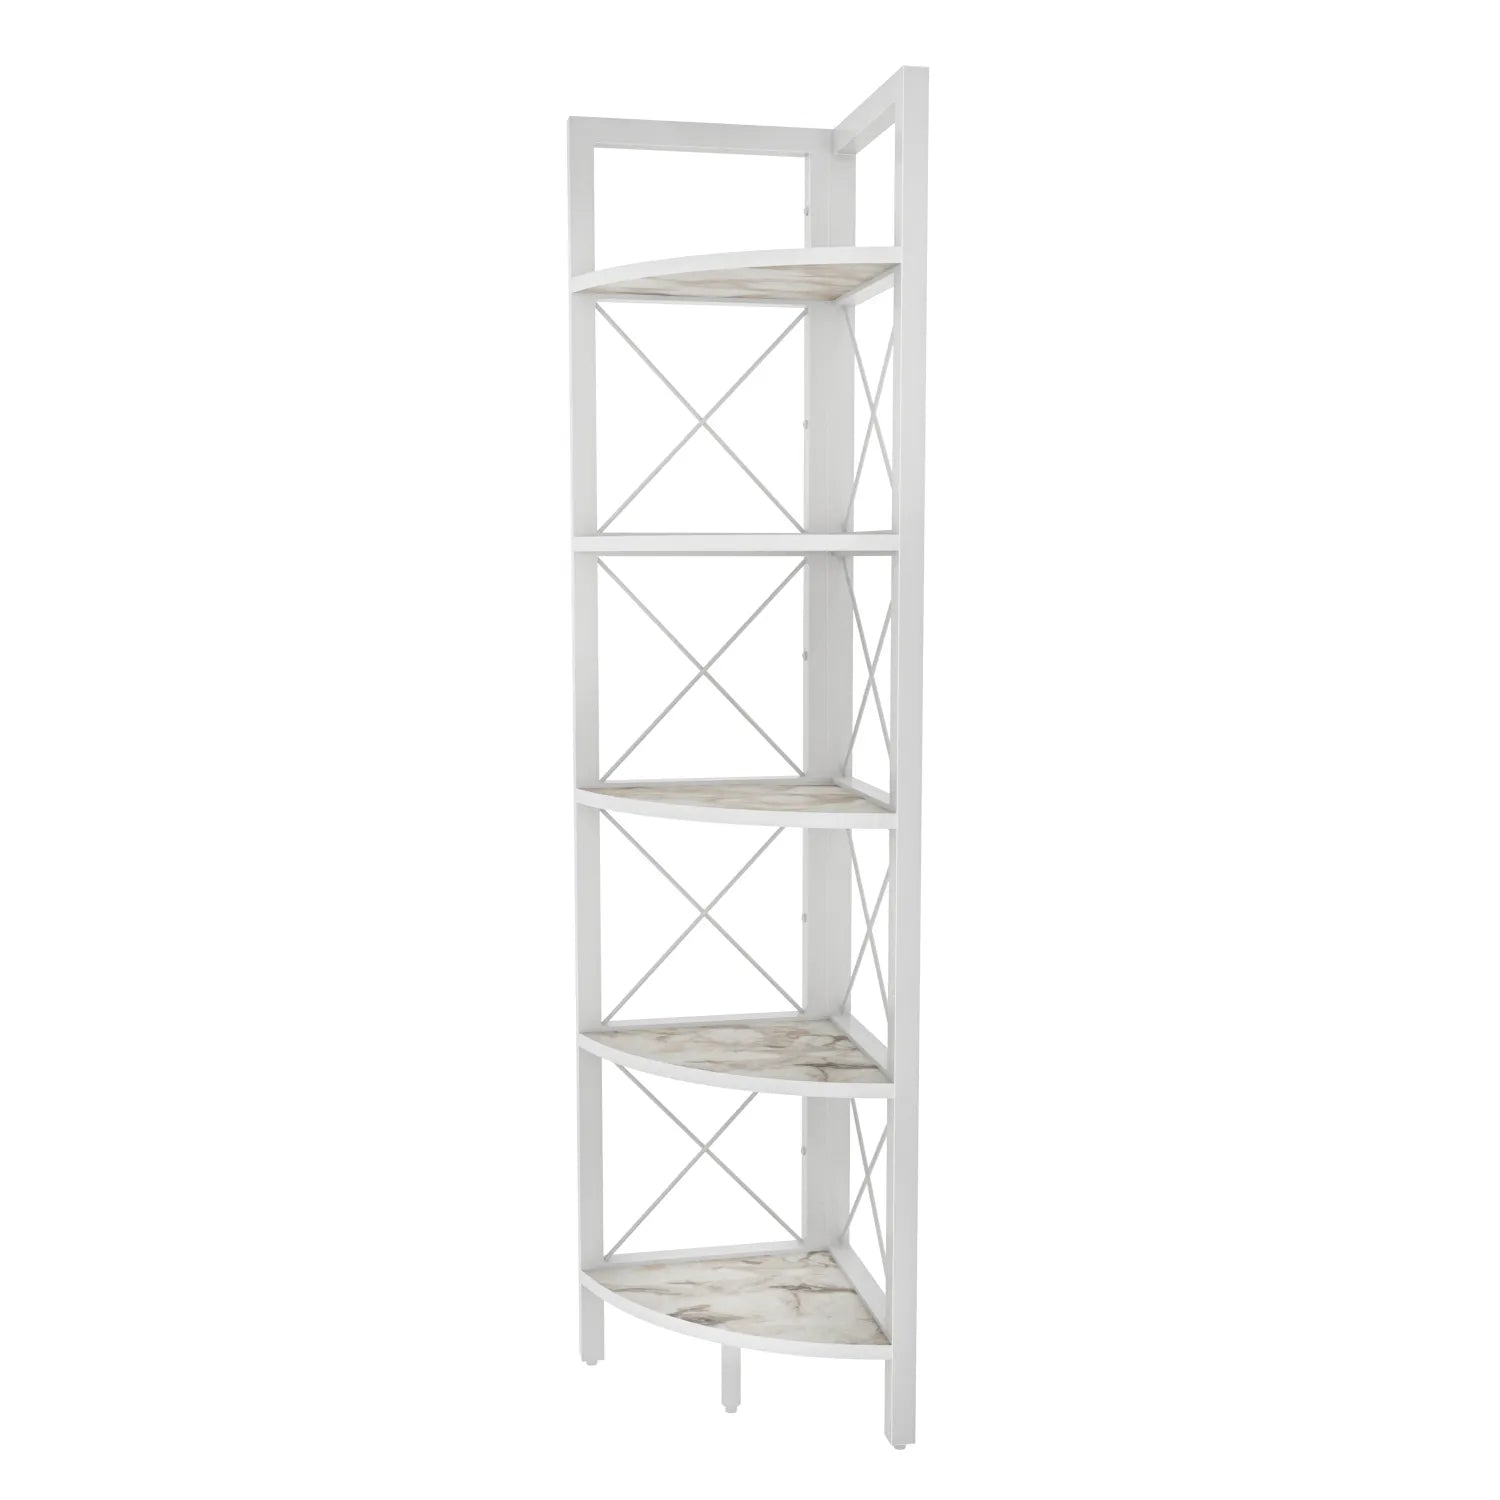 Remo 63 inch Tall Industrial Corner Bookcase with Metal Frame